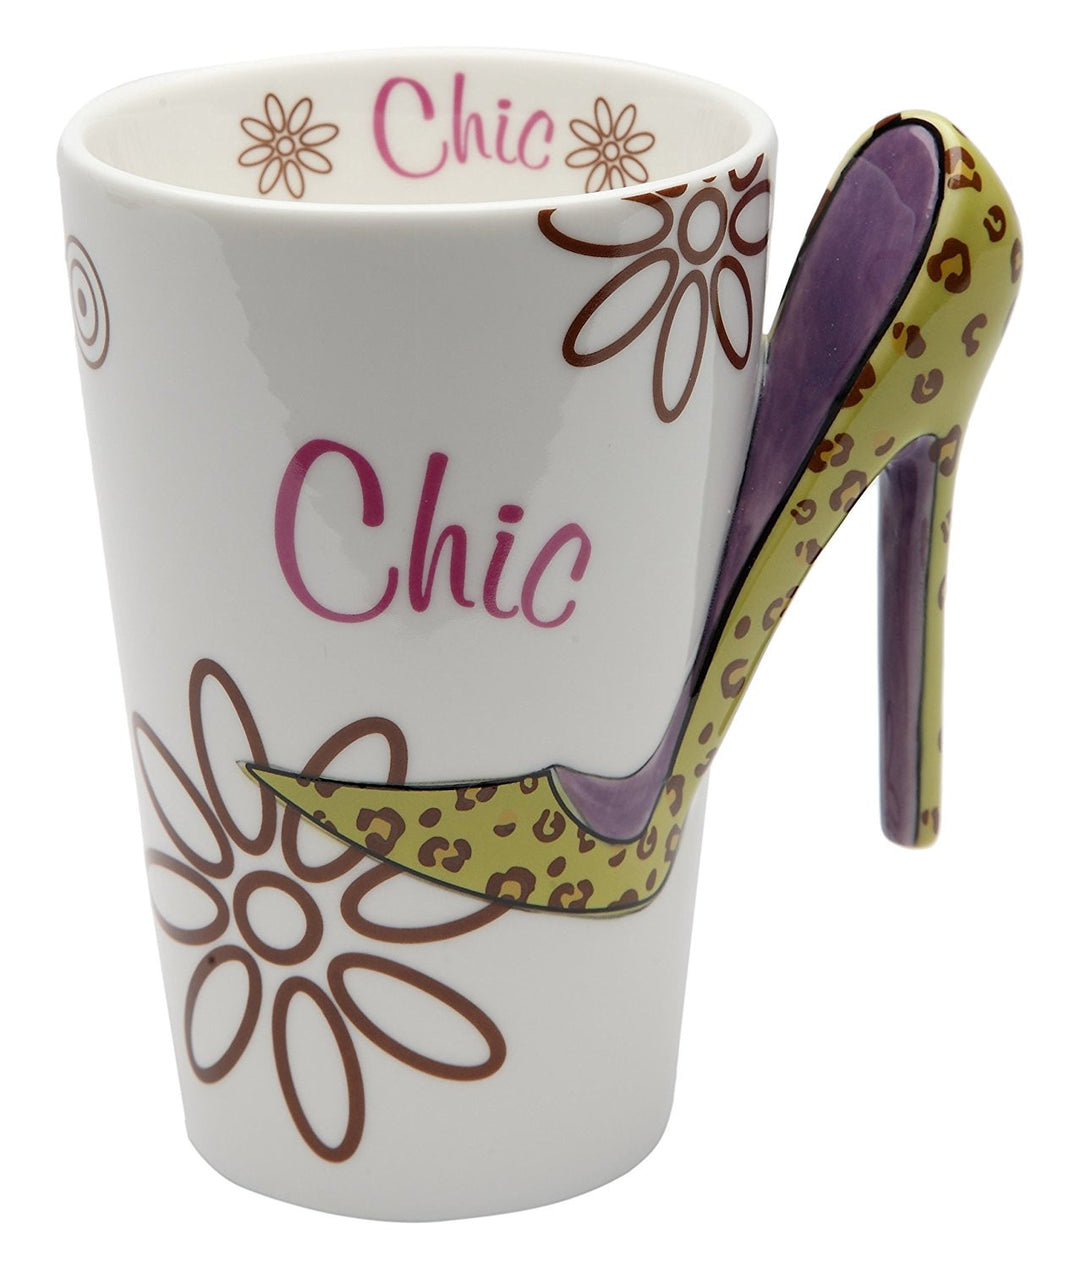 Chic Ceramic Mug with Stiletto Handle by Cosmos Gifts